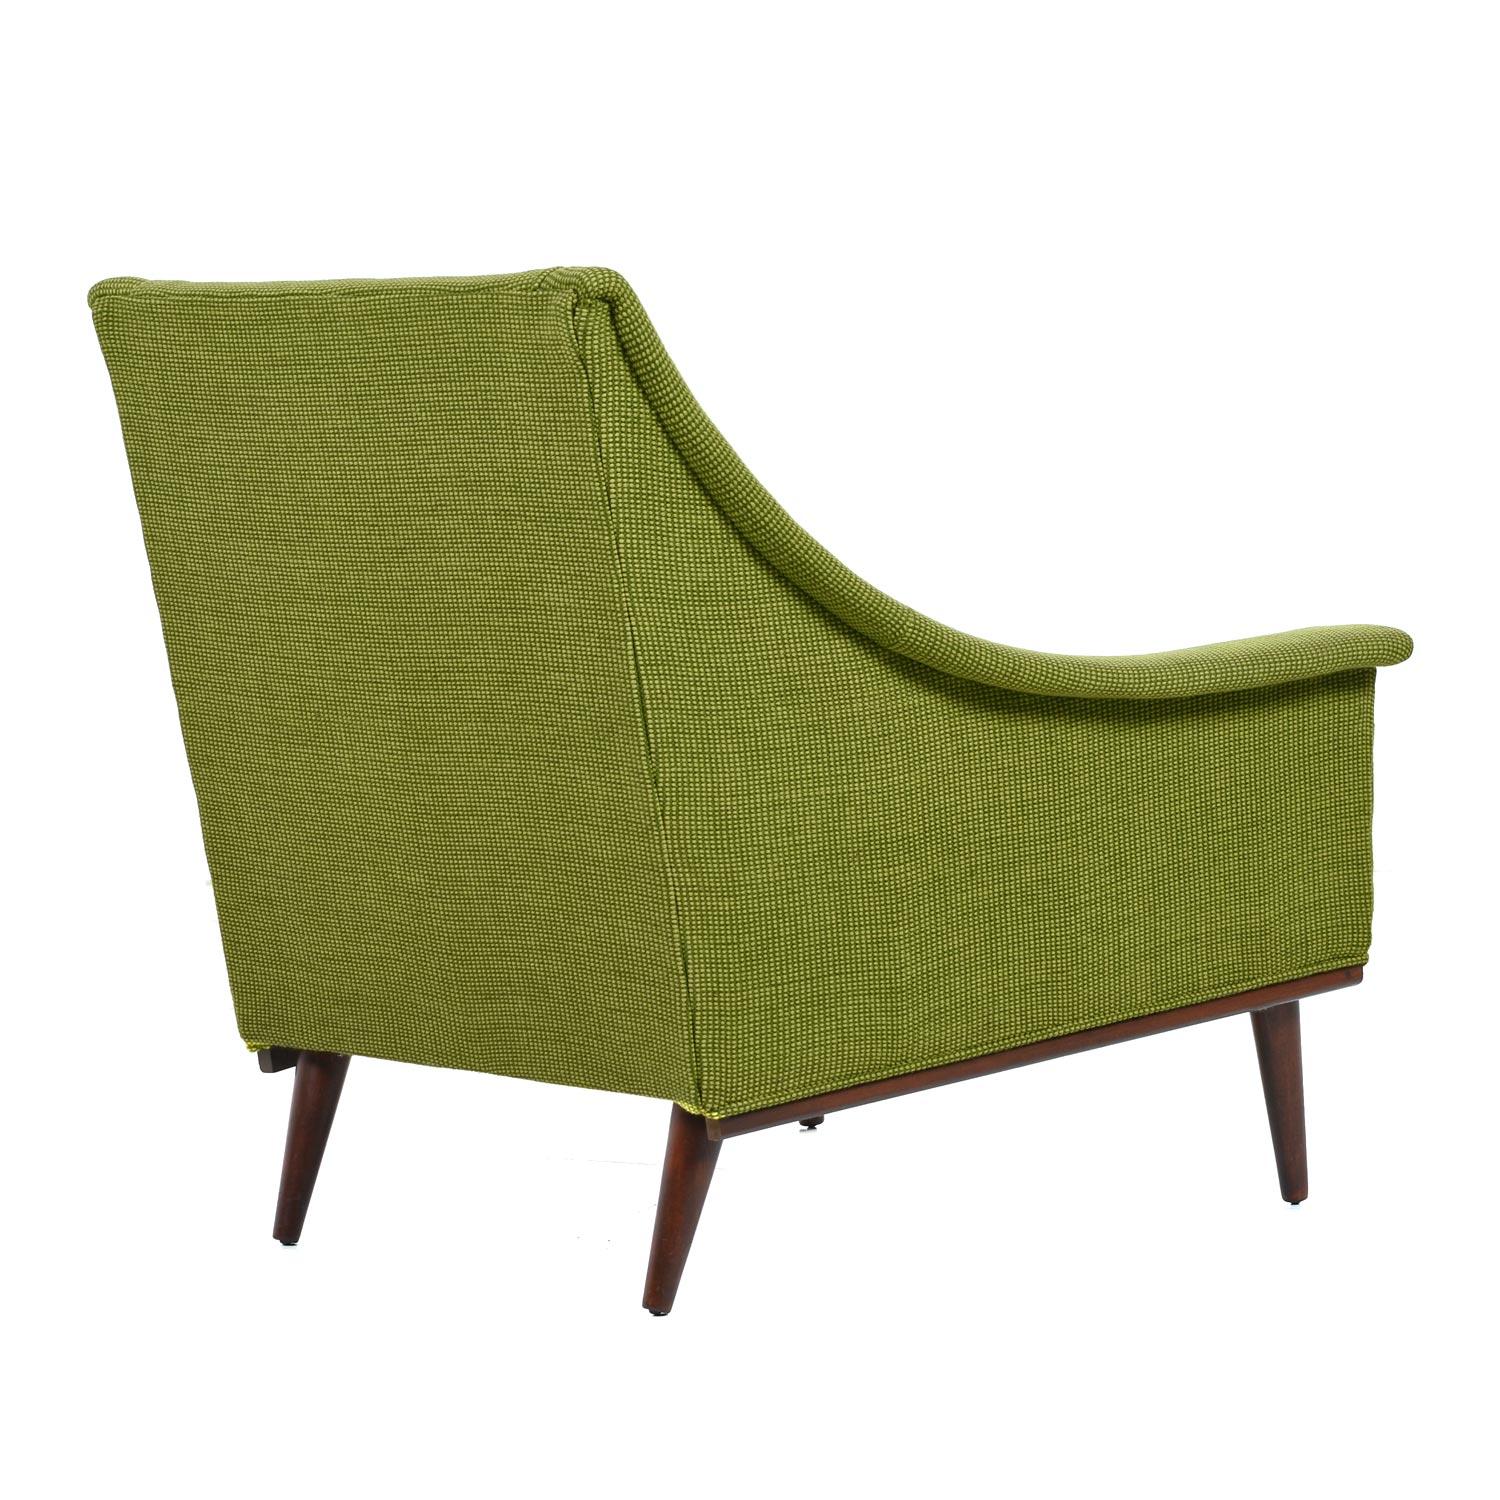 American Vintage Original Two-Tone Green Tweed Tufted Lounge Chairs by Selig, circa 1960s